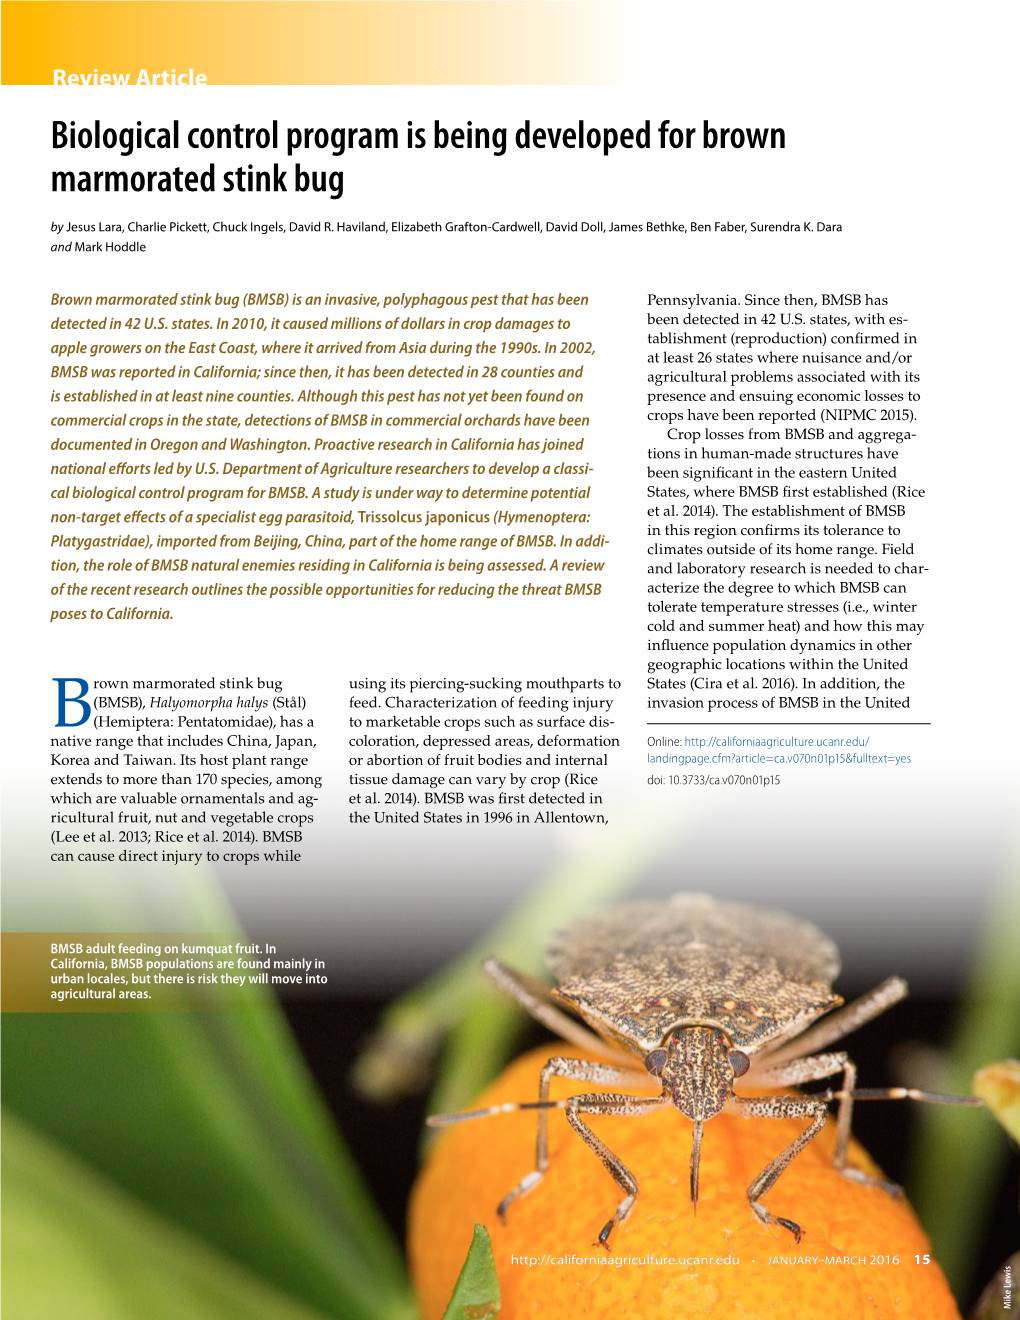 Biological Control Program Is Being Developed for Brown Marmorated Stink Bug by Jesus Lara, Charlie Pickett, Chuck Ingels, David R